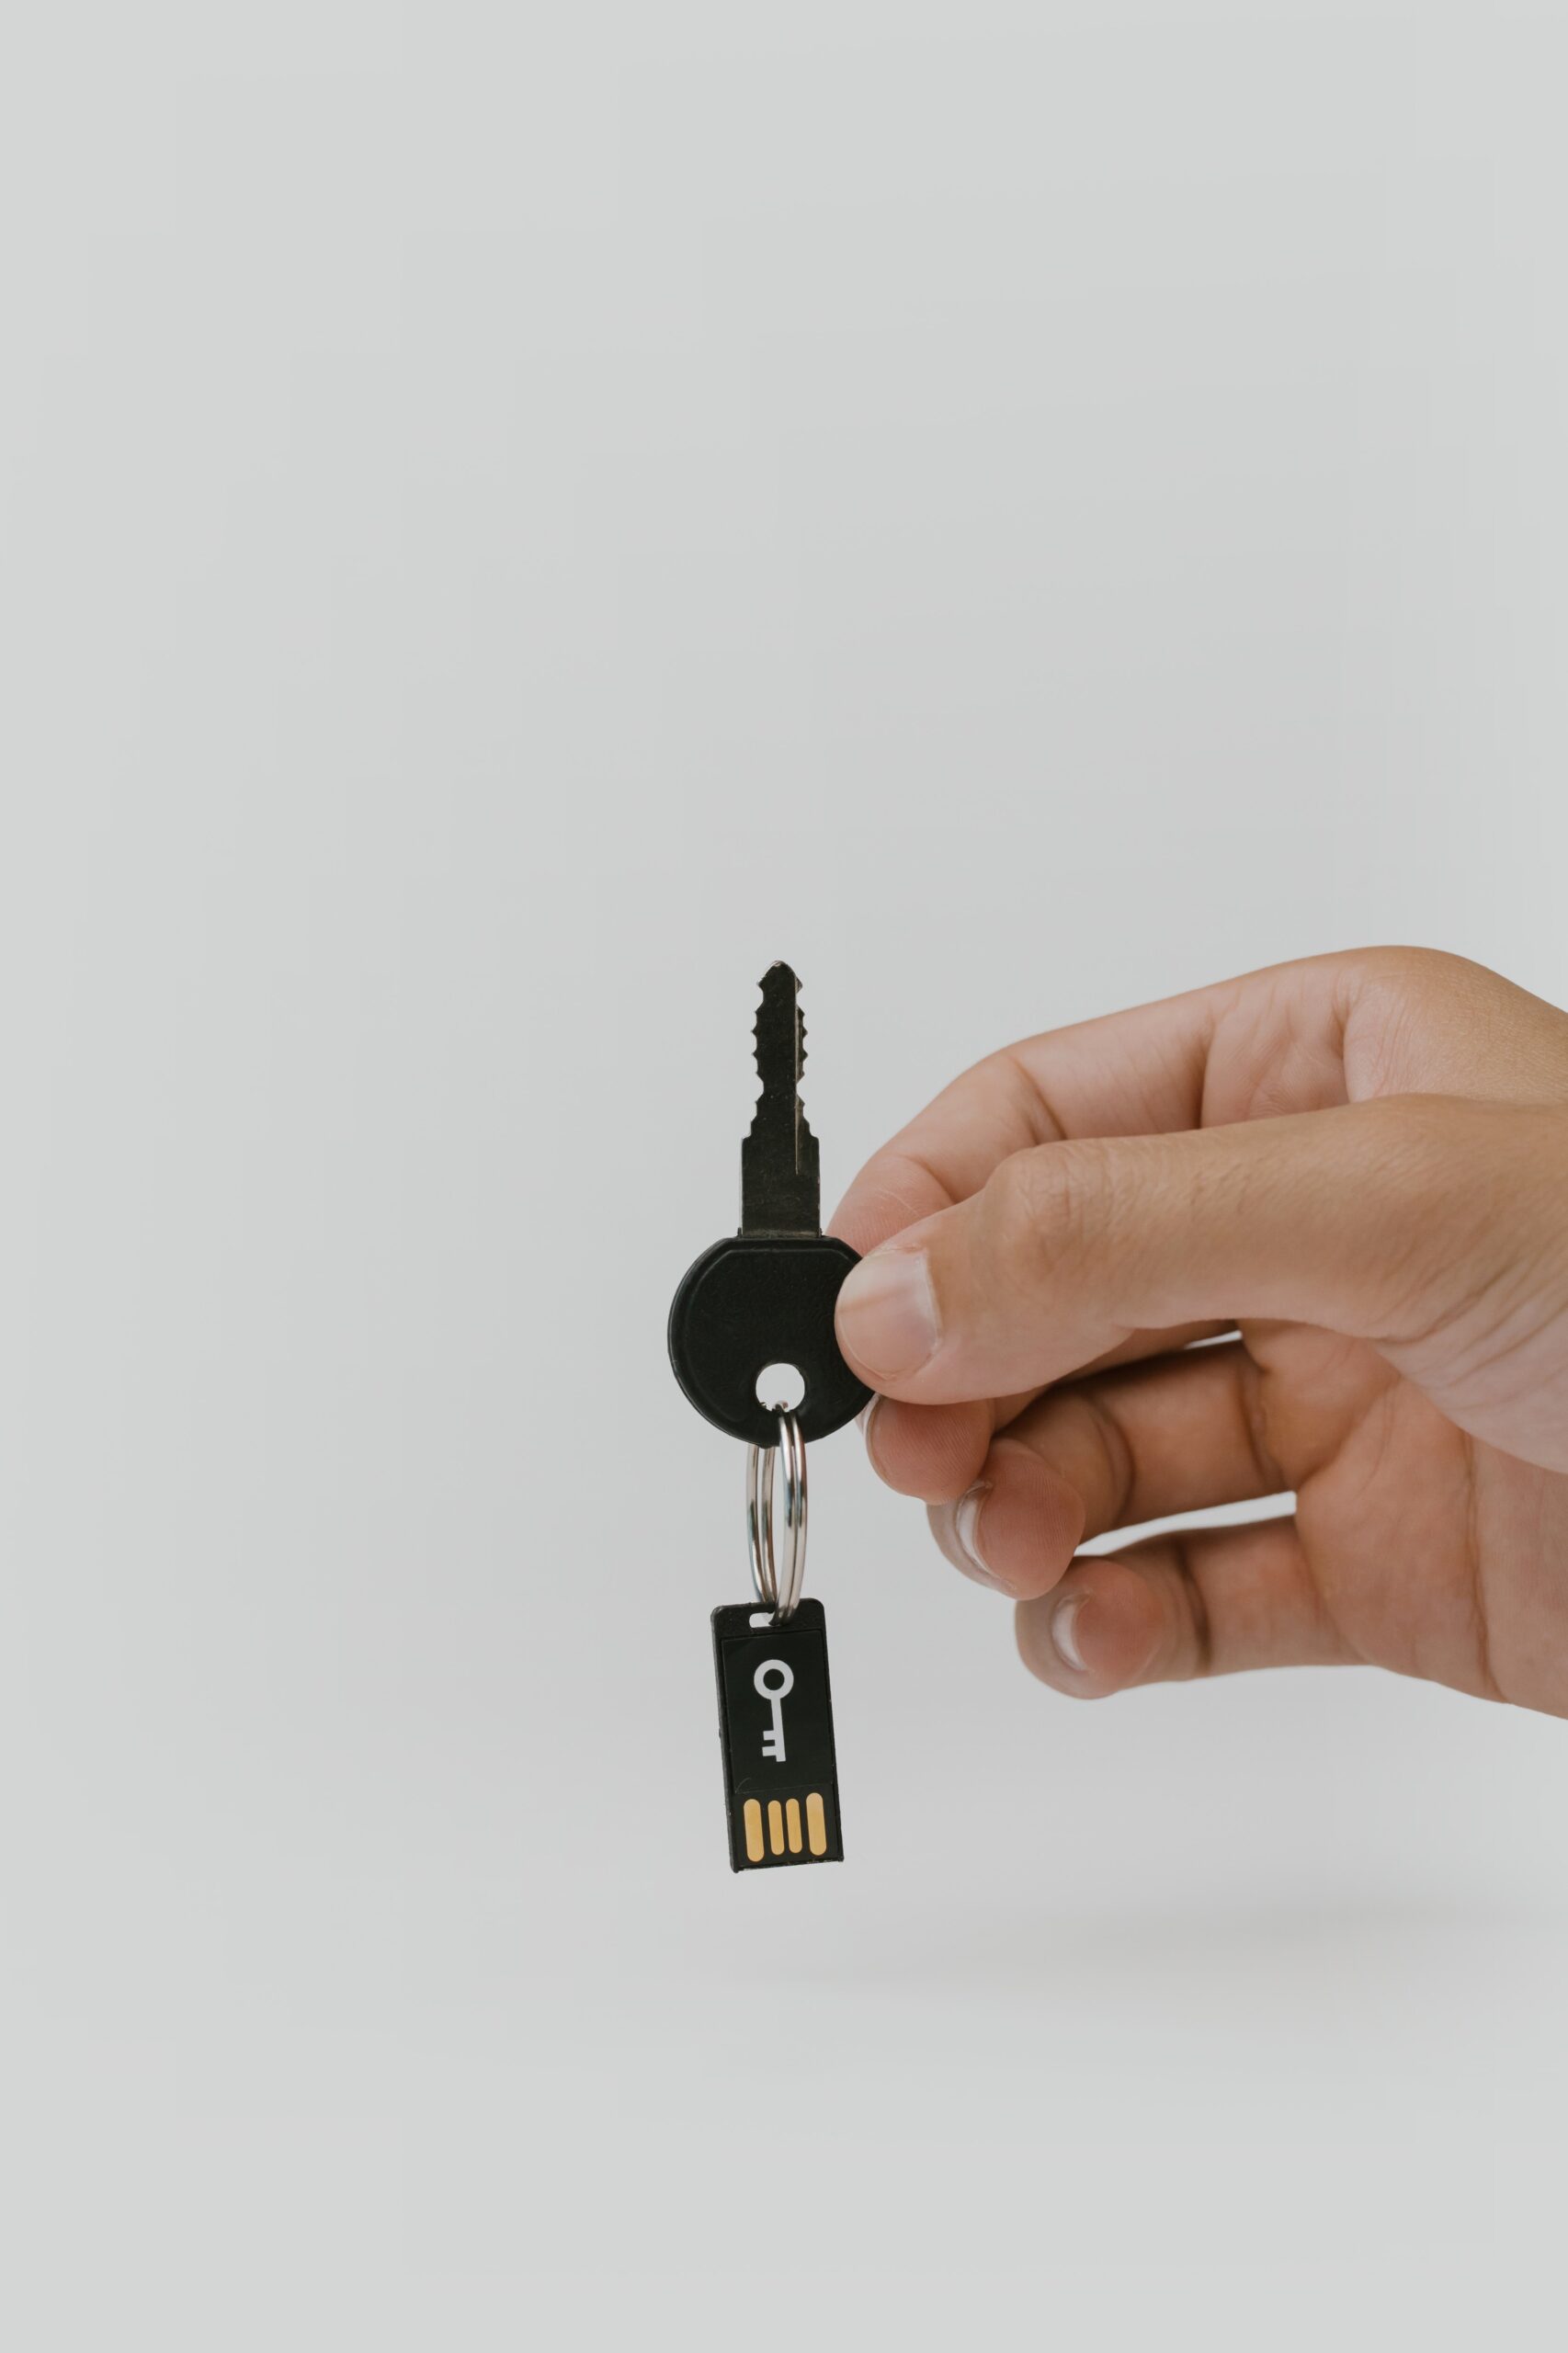 A keychain with a security key attached.